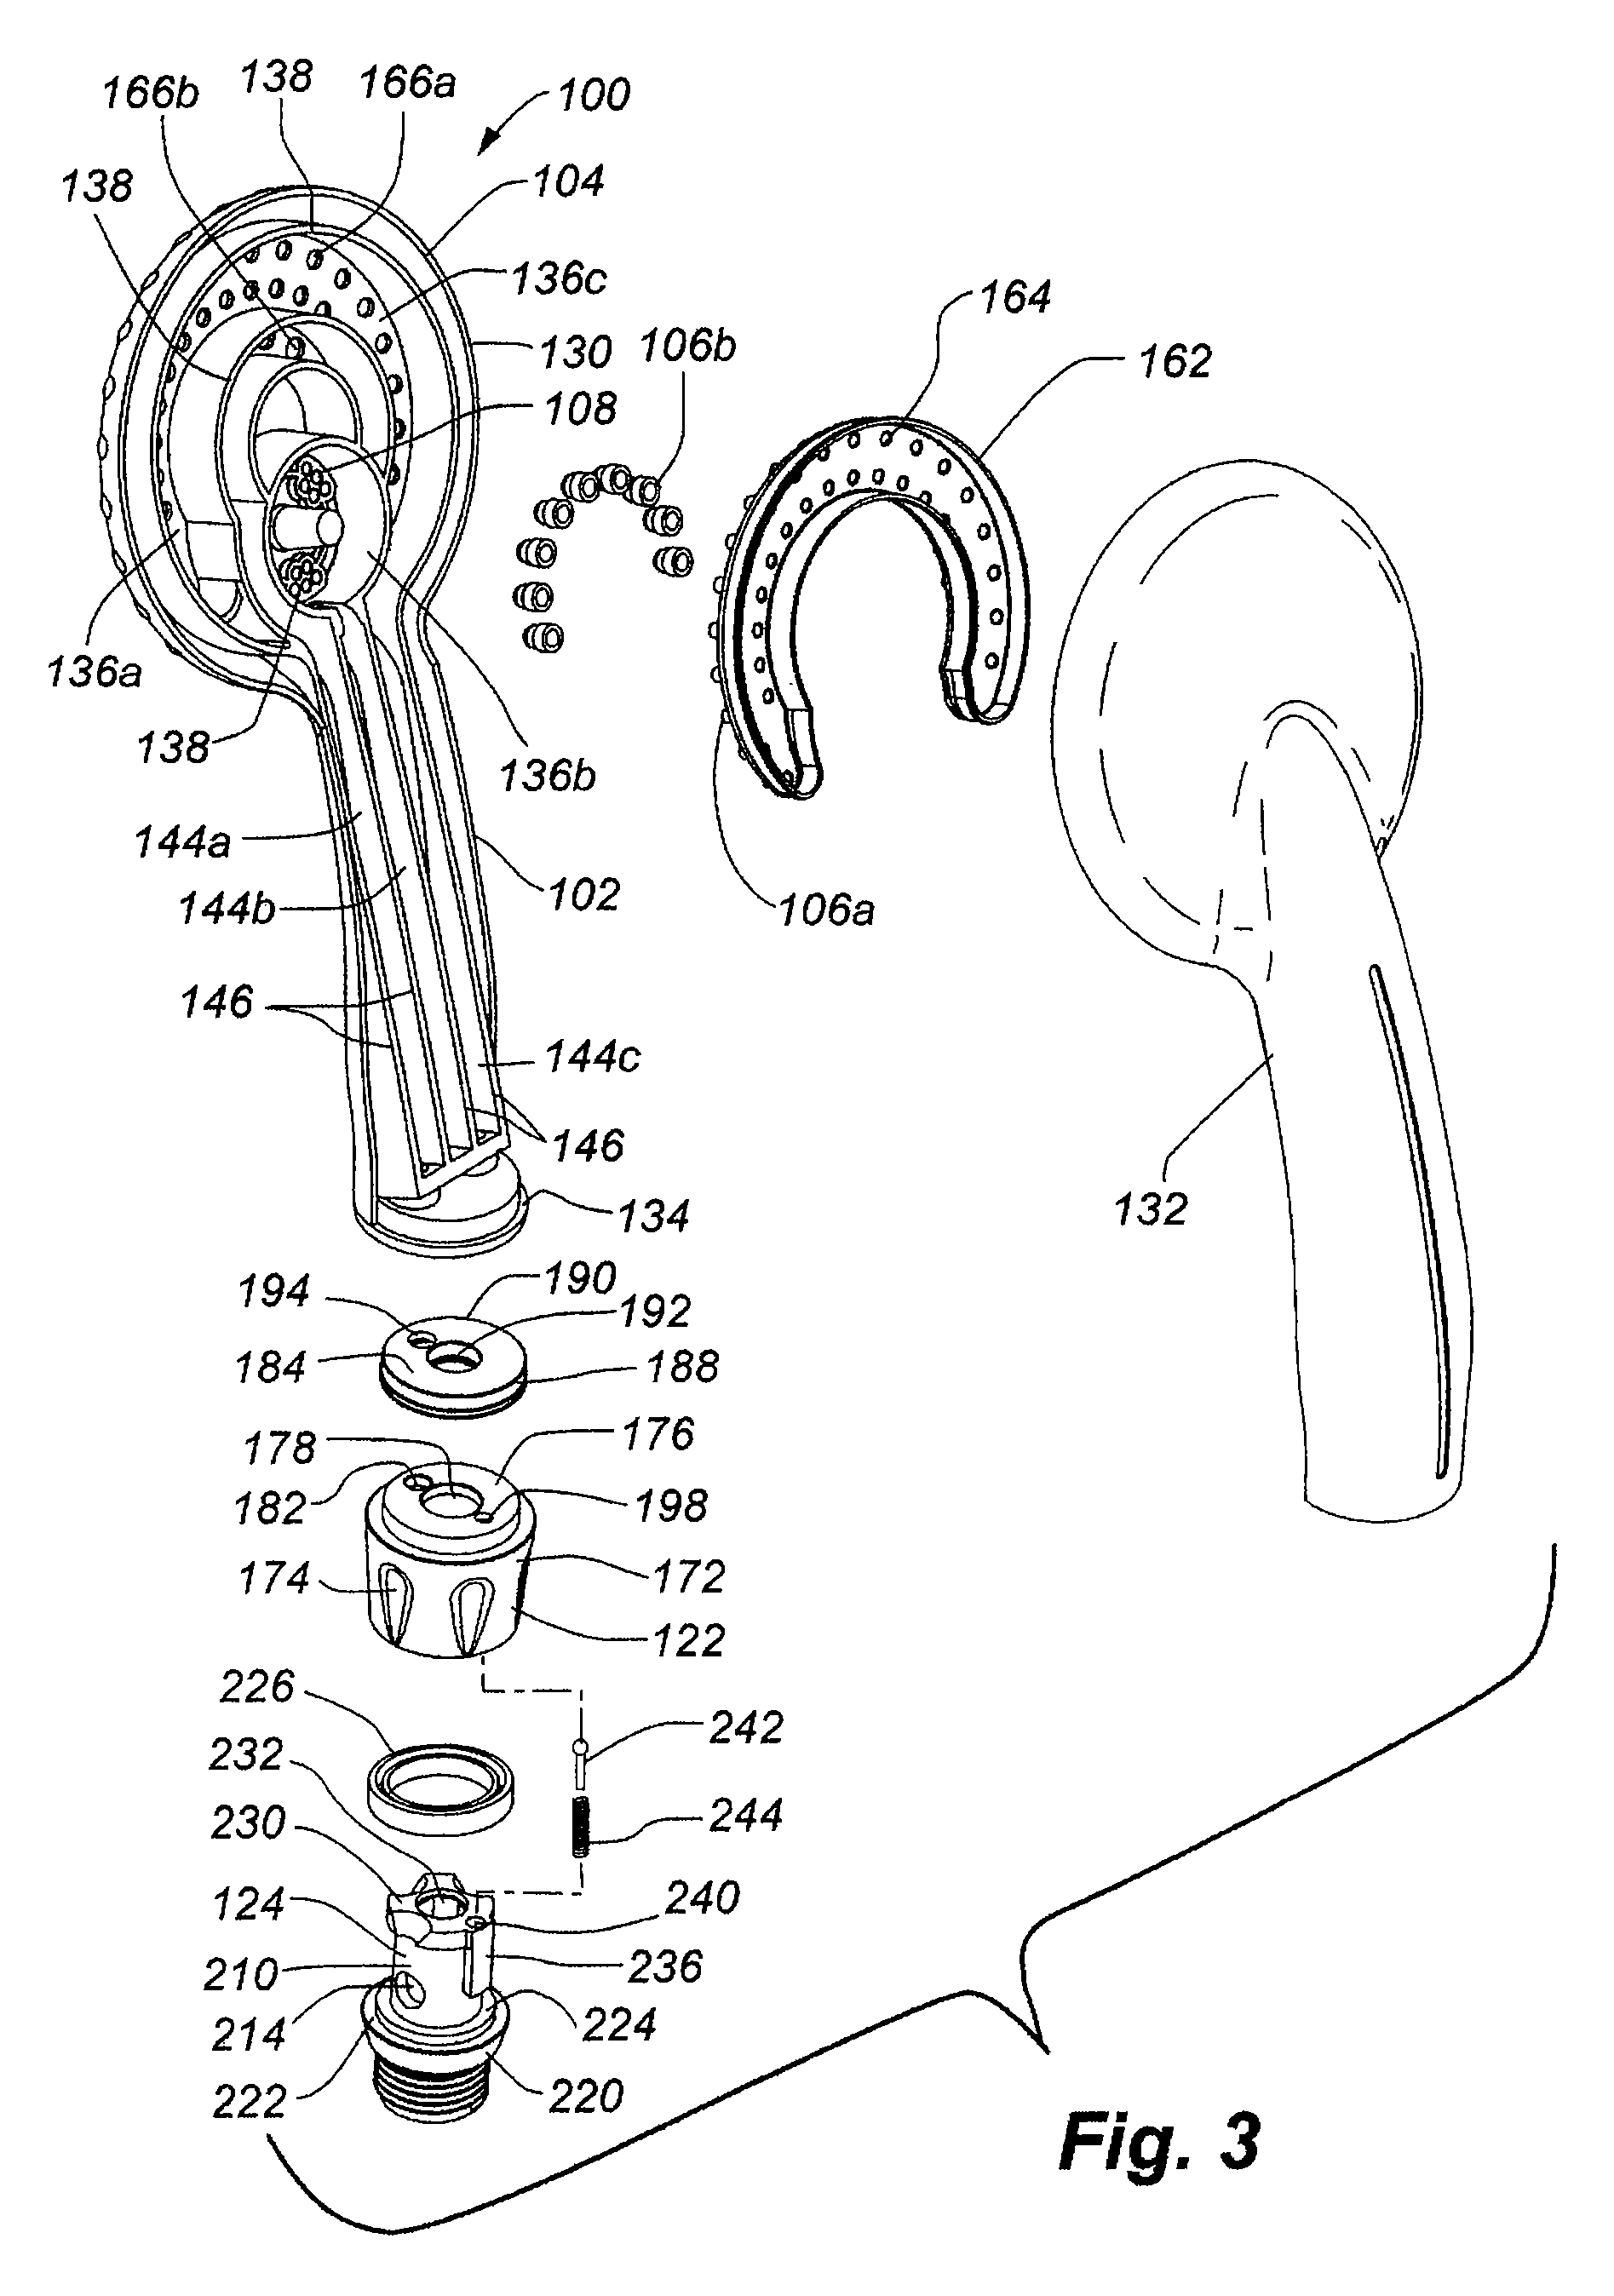 Handheld showerhead with mode control and method of selecting a handheld showerhead mode